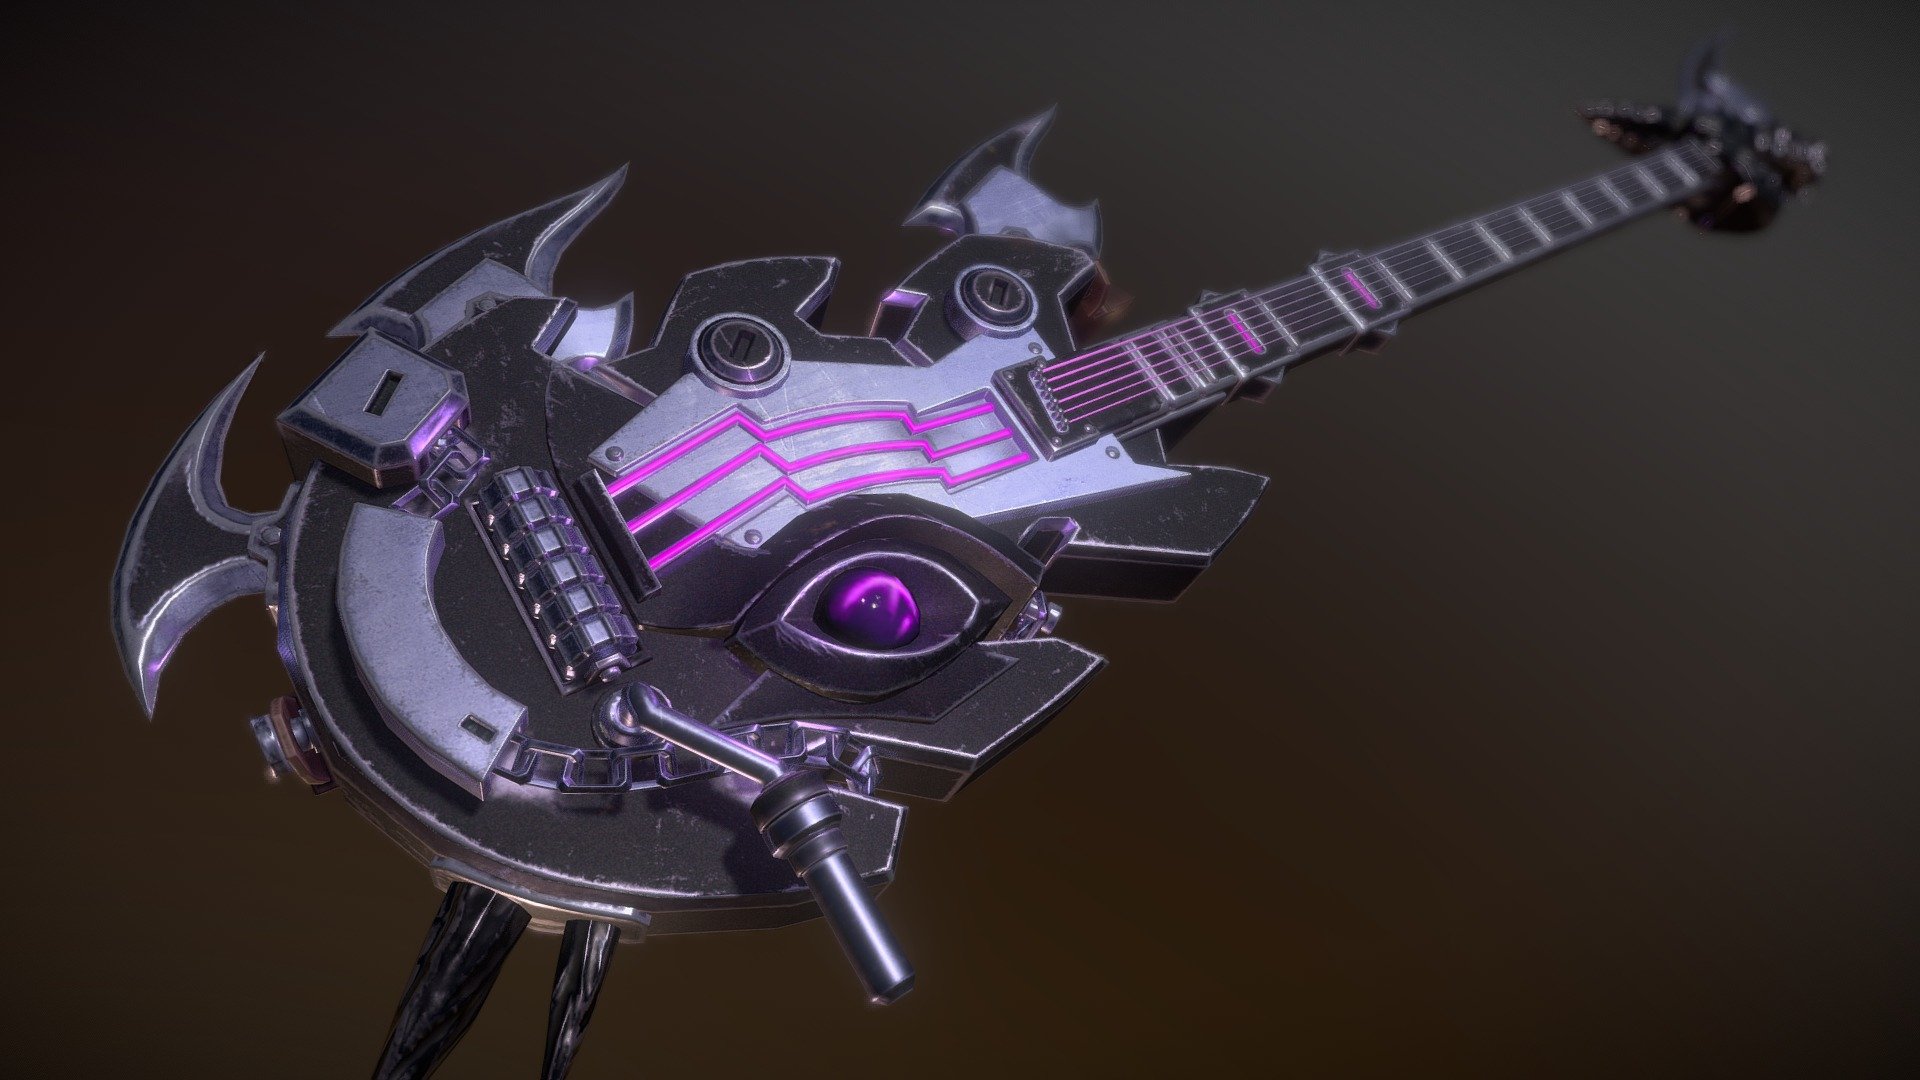 A commissioned piece for a Monster Hunter: World mod. A realistic rendition of an anime guitar from the game Soul Worker. This one was fun! 

In game, the chains and strap have physics, the emissive breathes, and it uses this model for the sheathed form allowing the model to sit naturally on the shoulder.

Made entirely in Blender 2.8 and Substance Painter. With some tweaking and channel adjustments in Photoshop 3d model